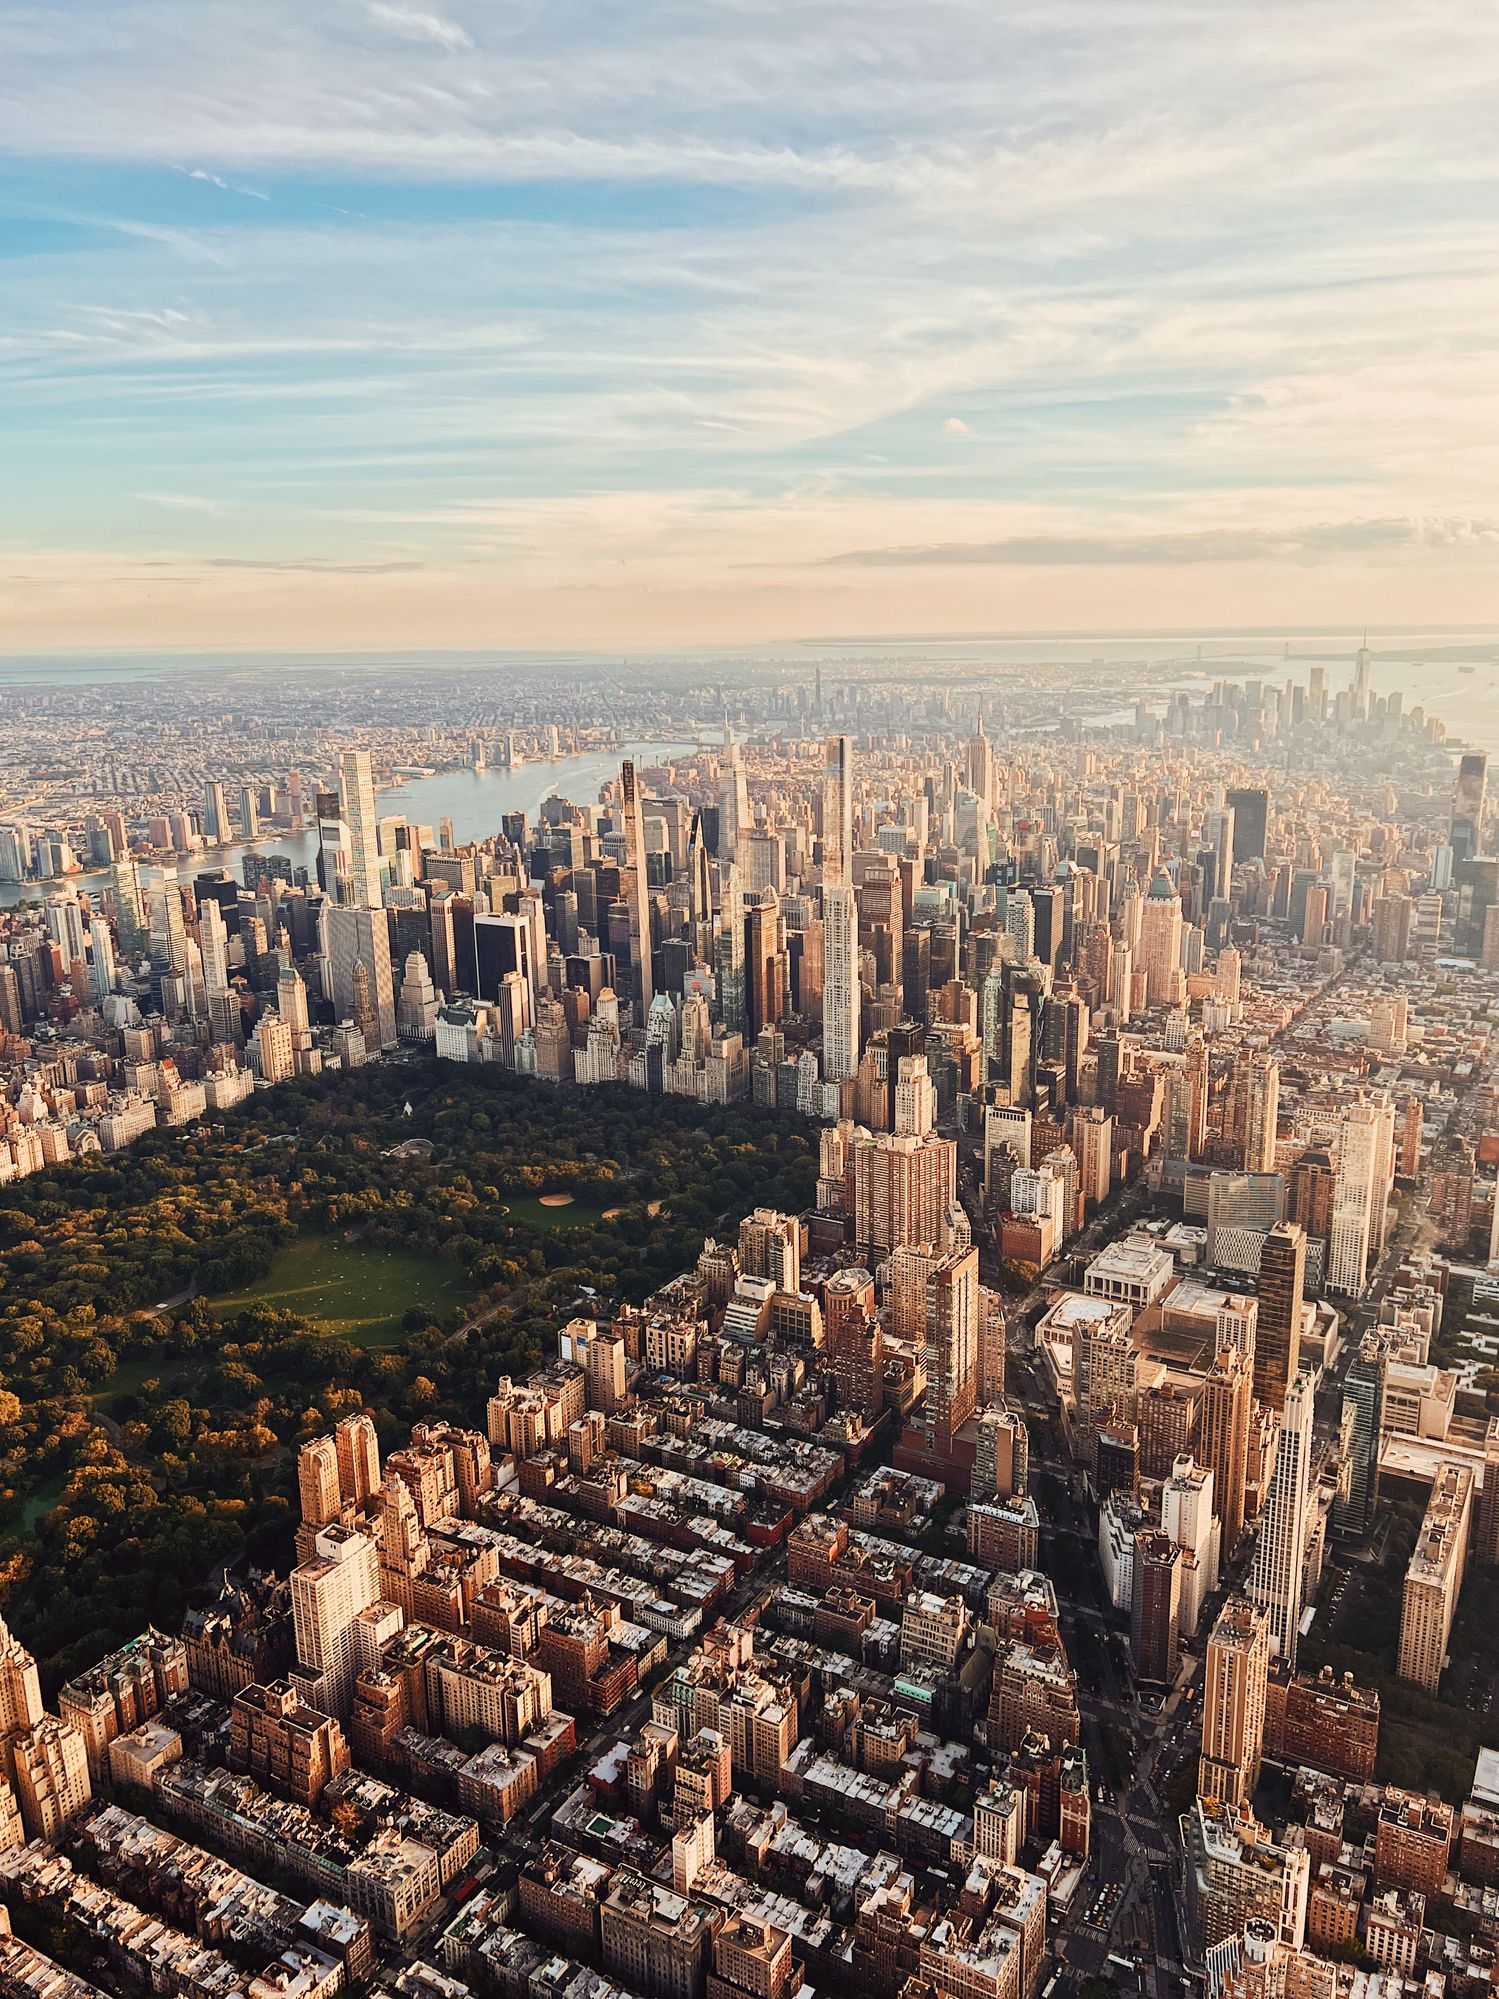 <p>New York City is expecting more than 61 million tourists expected to visit in 2023. Should your family be among them? We certainly think so! Sure, we're a little biased (our offices are here!), but who better to give you the inside scoop than some locals? We tapped the expertise of our editors and staff members — especially those who have kids and teens — plus Beth Beckman, Manhattan-based author of <a href="https://www.amazon.com/Little-Kid-Big-City-York/dp/1683692446?tag=syndication-20&ascsubtag=%5Bartid%7C10055.g.44504955%5Bsrc%7Cmsn-us">Little Kid, Big City! New York</a>, to bring you a list of 15 must-sees on your New York City visit.</p><p>The one tip that nearly everyone on our team mentioned: Don't just hang out in Times Square. "It's calmer, cleaner and so much fun in other parts of Manhattan and other boroughs like Brooklyn and Queens," said one editor. After you see a Broadway show or two, head uptown or downtown to explore under-the-radar gems and popular tourist stops that are legit awesome. (Did you know there's a waterfall in NYC?) </p><p>The subway is the most cost-effective way to get around — and city kids often take it by themselves by the time they're in middle school. Buy each family member a <a href="https://go.redirectingat.com?id=74968X1553576&url=https%3A%2F%2Fnewyorkpass.com%2Fen-us%2Fblog%2Fpublic-transportation-new-york-city-new-york-metrocard&sref=https%3A%2F%2Fwww.goodhousekeeping.com%2Flife%2Ftravel%2Fg44504955%2Fthings-to-do-in-nyc%2F">$29 New York Metro Card</a> that's good for unlimited rides for a week. Use Google Maps to help you navigate stops and stations; it's often pretty accurate about train times too. We hope to see you in NYC real soon!</p>